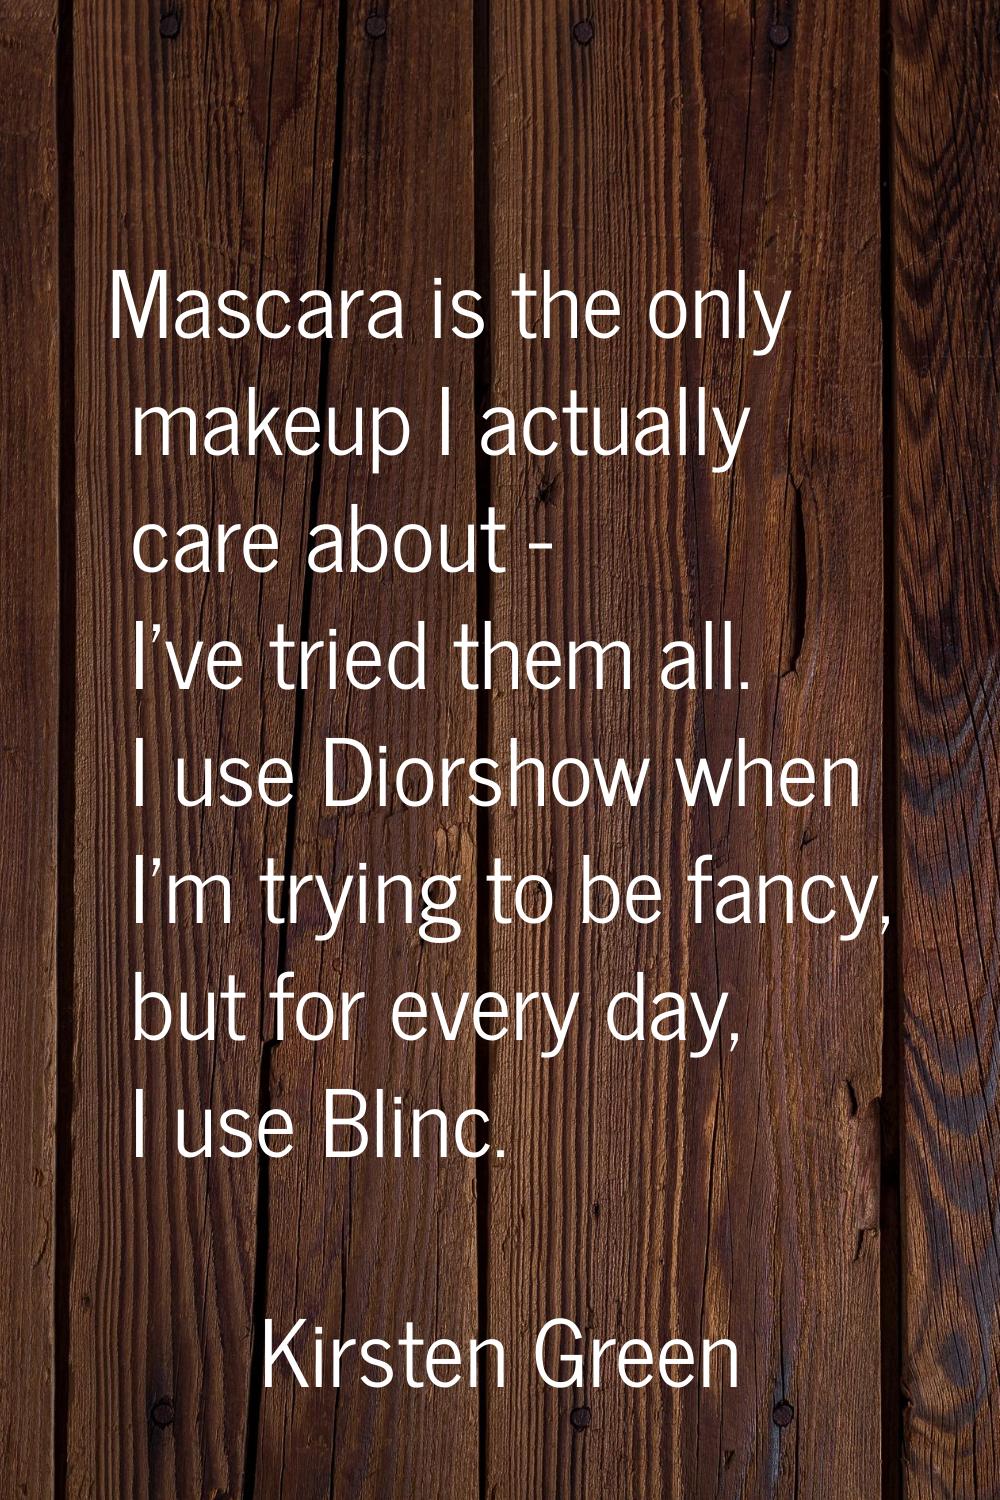 Mascara is the only makeup I actually care about - I've tried them all. I use Diorshow when I'm try